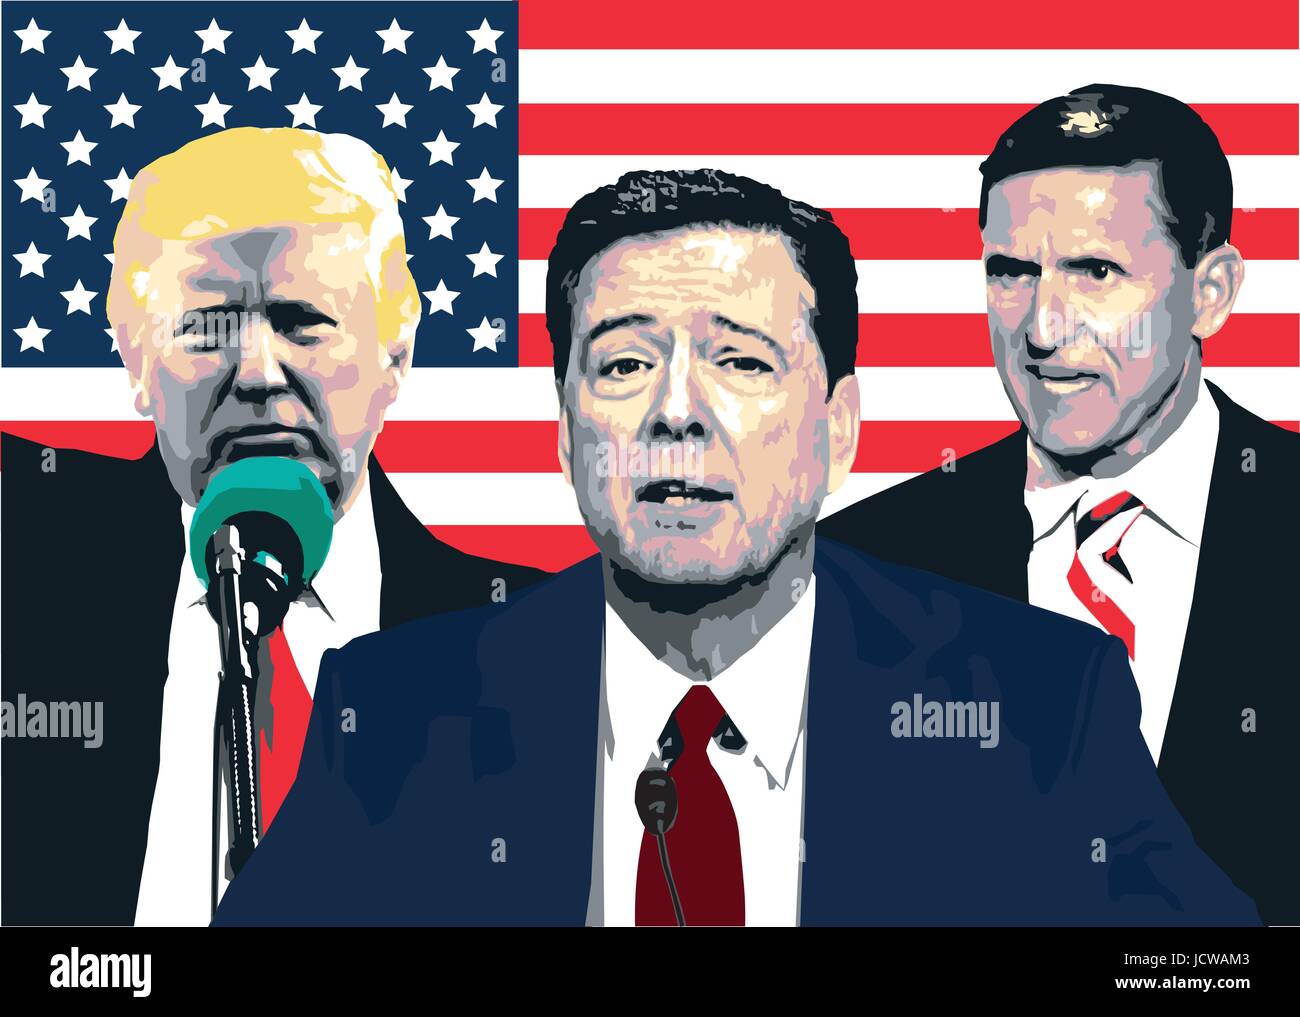 Vector illustration pertaining to James Comey's Senate Intelligence Committee hearing, and its relevance to President Donald Trump and Michael Flynn. Stock Vector